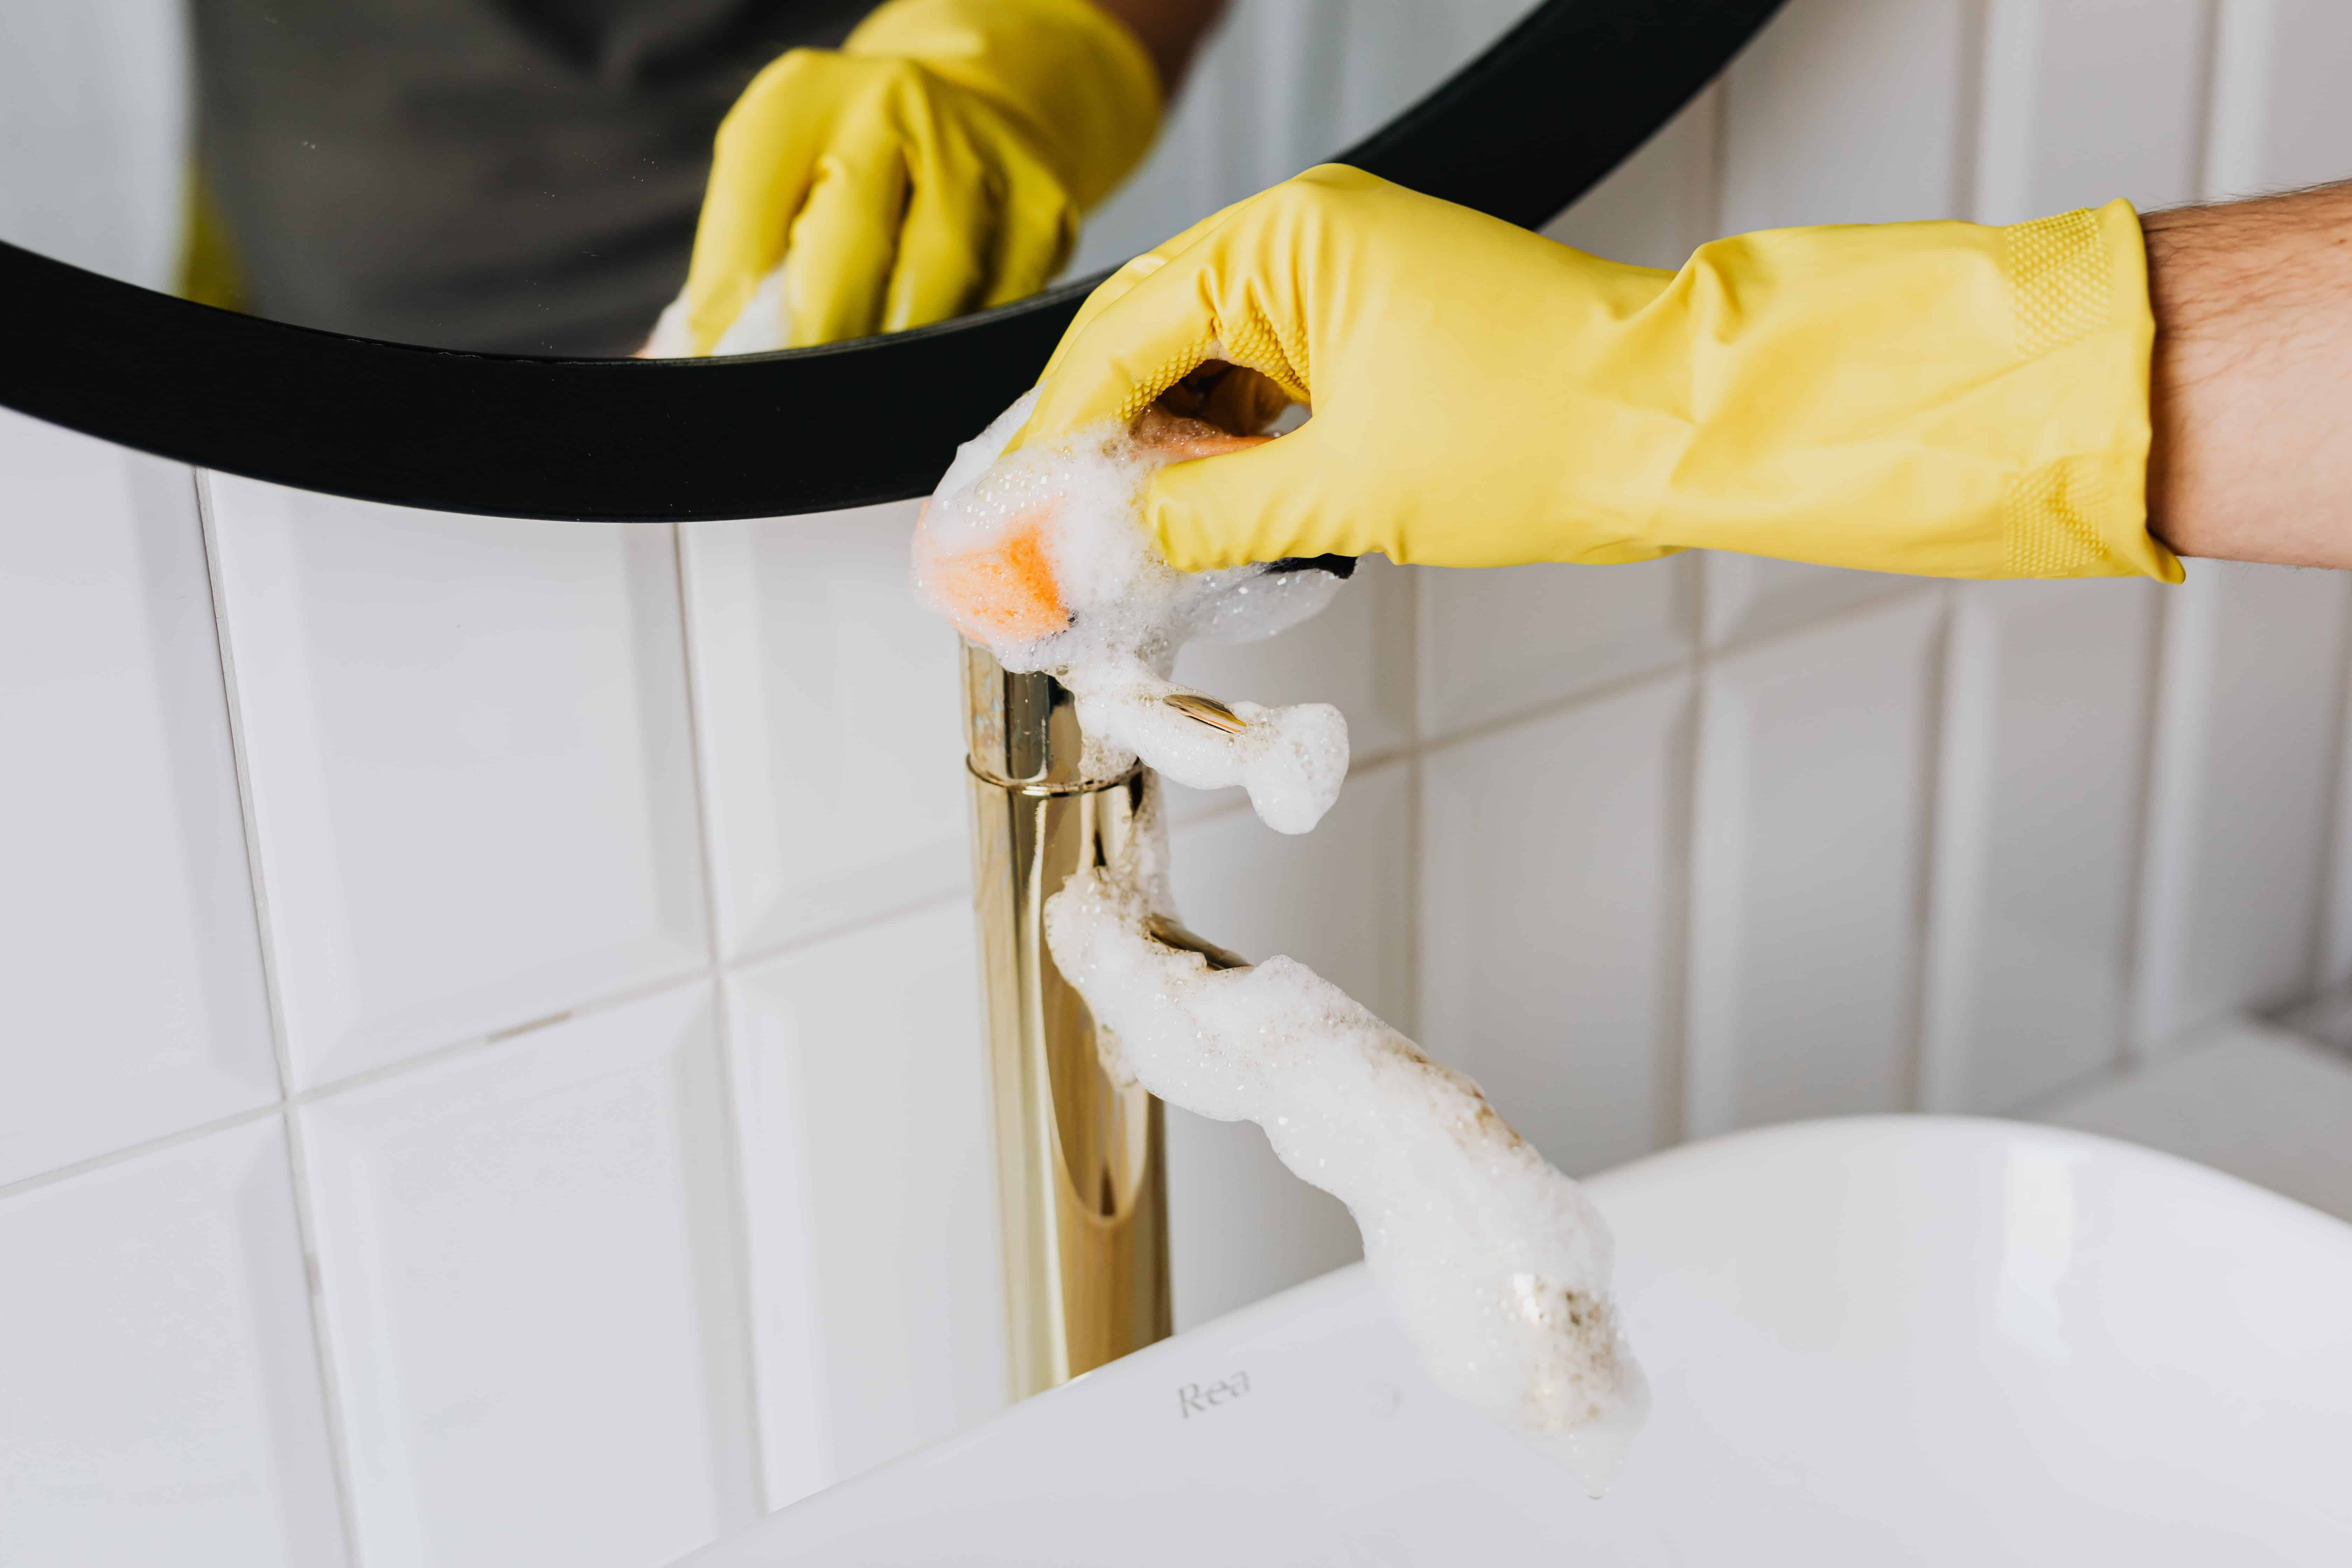 Dust Queen epmloyee cleaning bathroom plumbing fixtures as part of a residential clean.